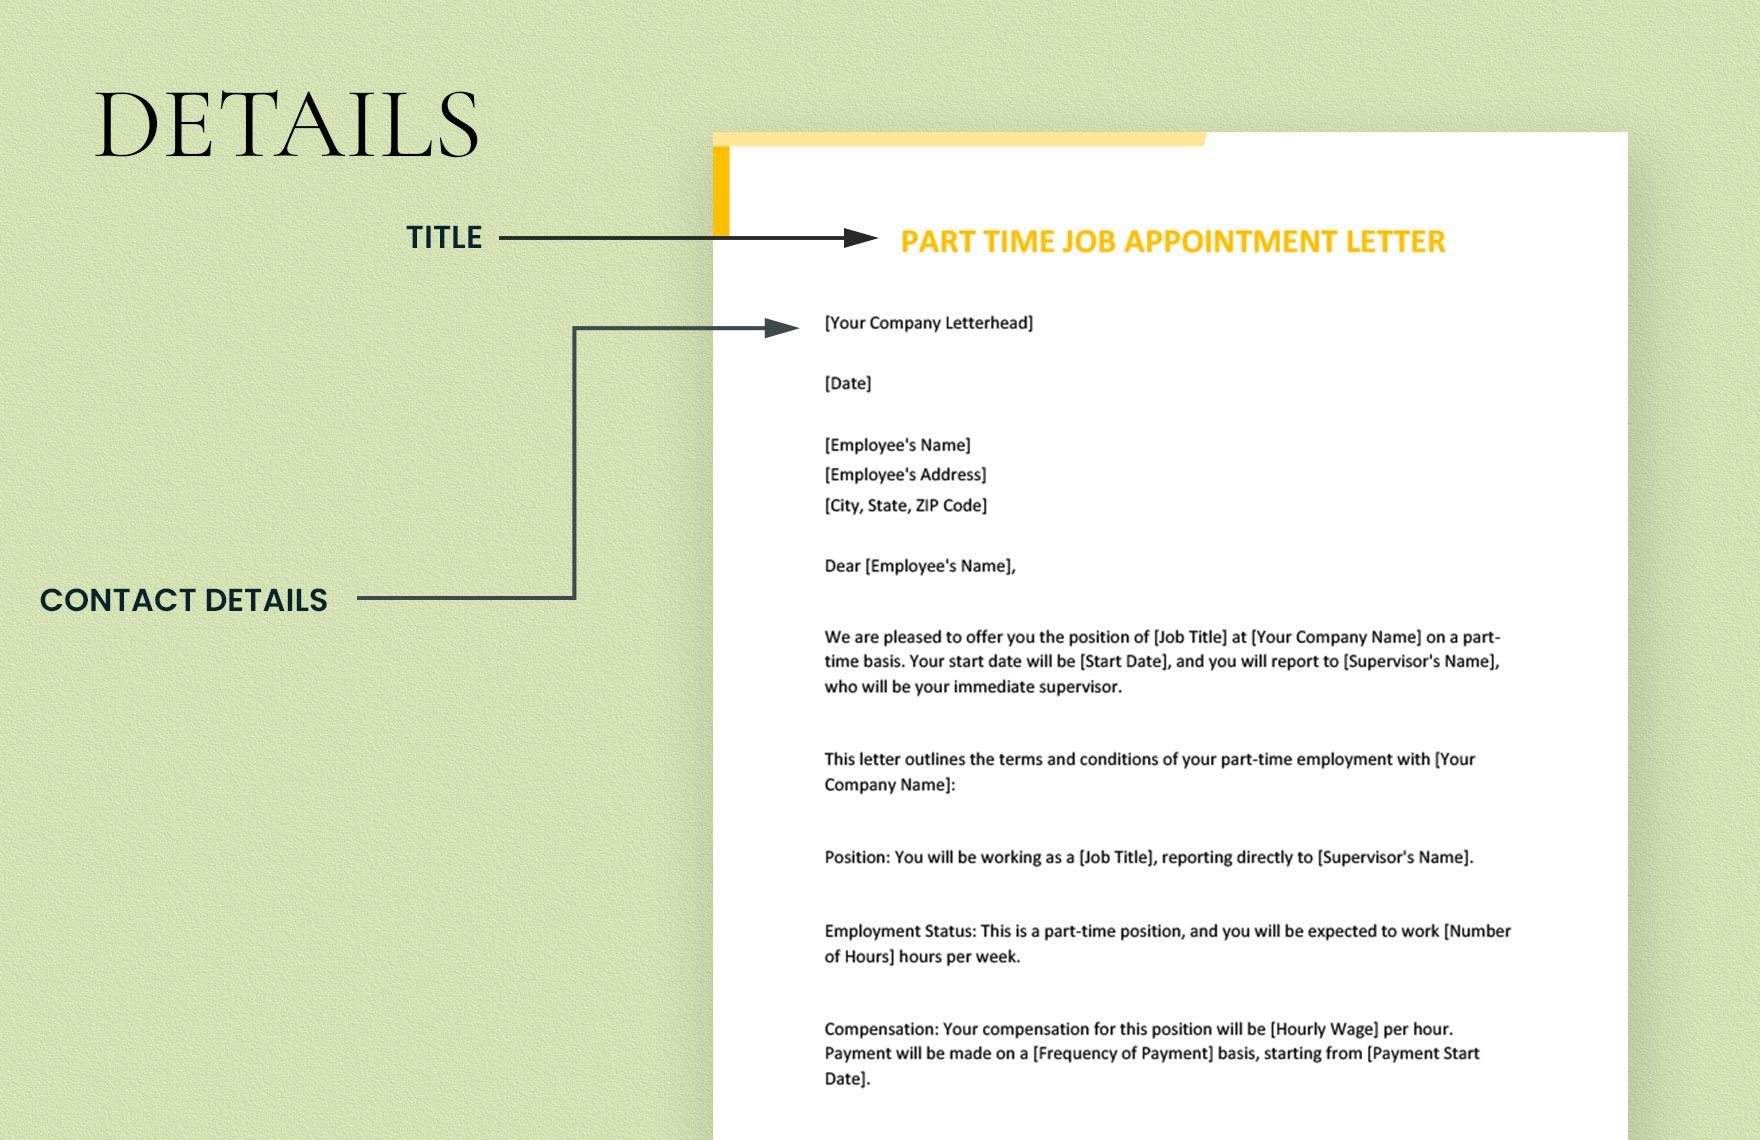 Part Time Job Appointment Letter